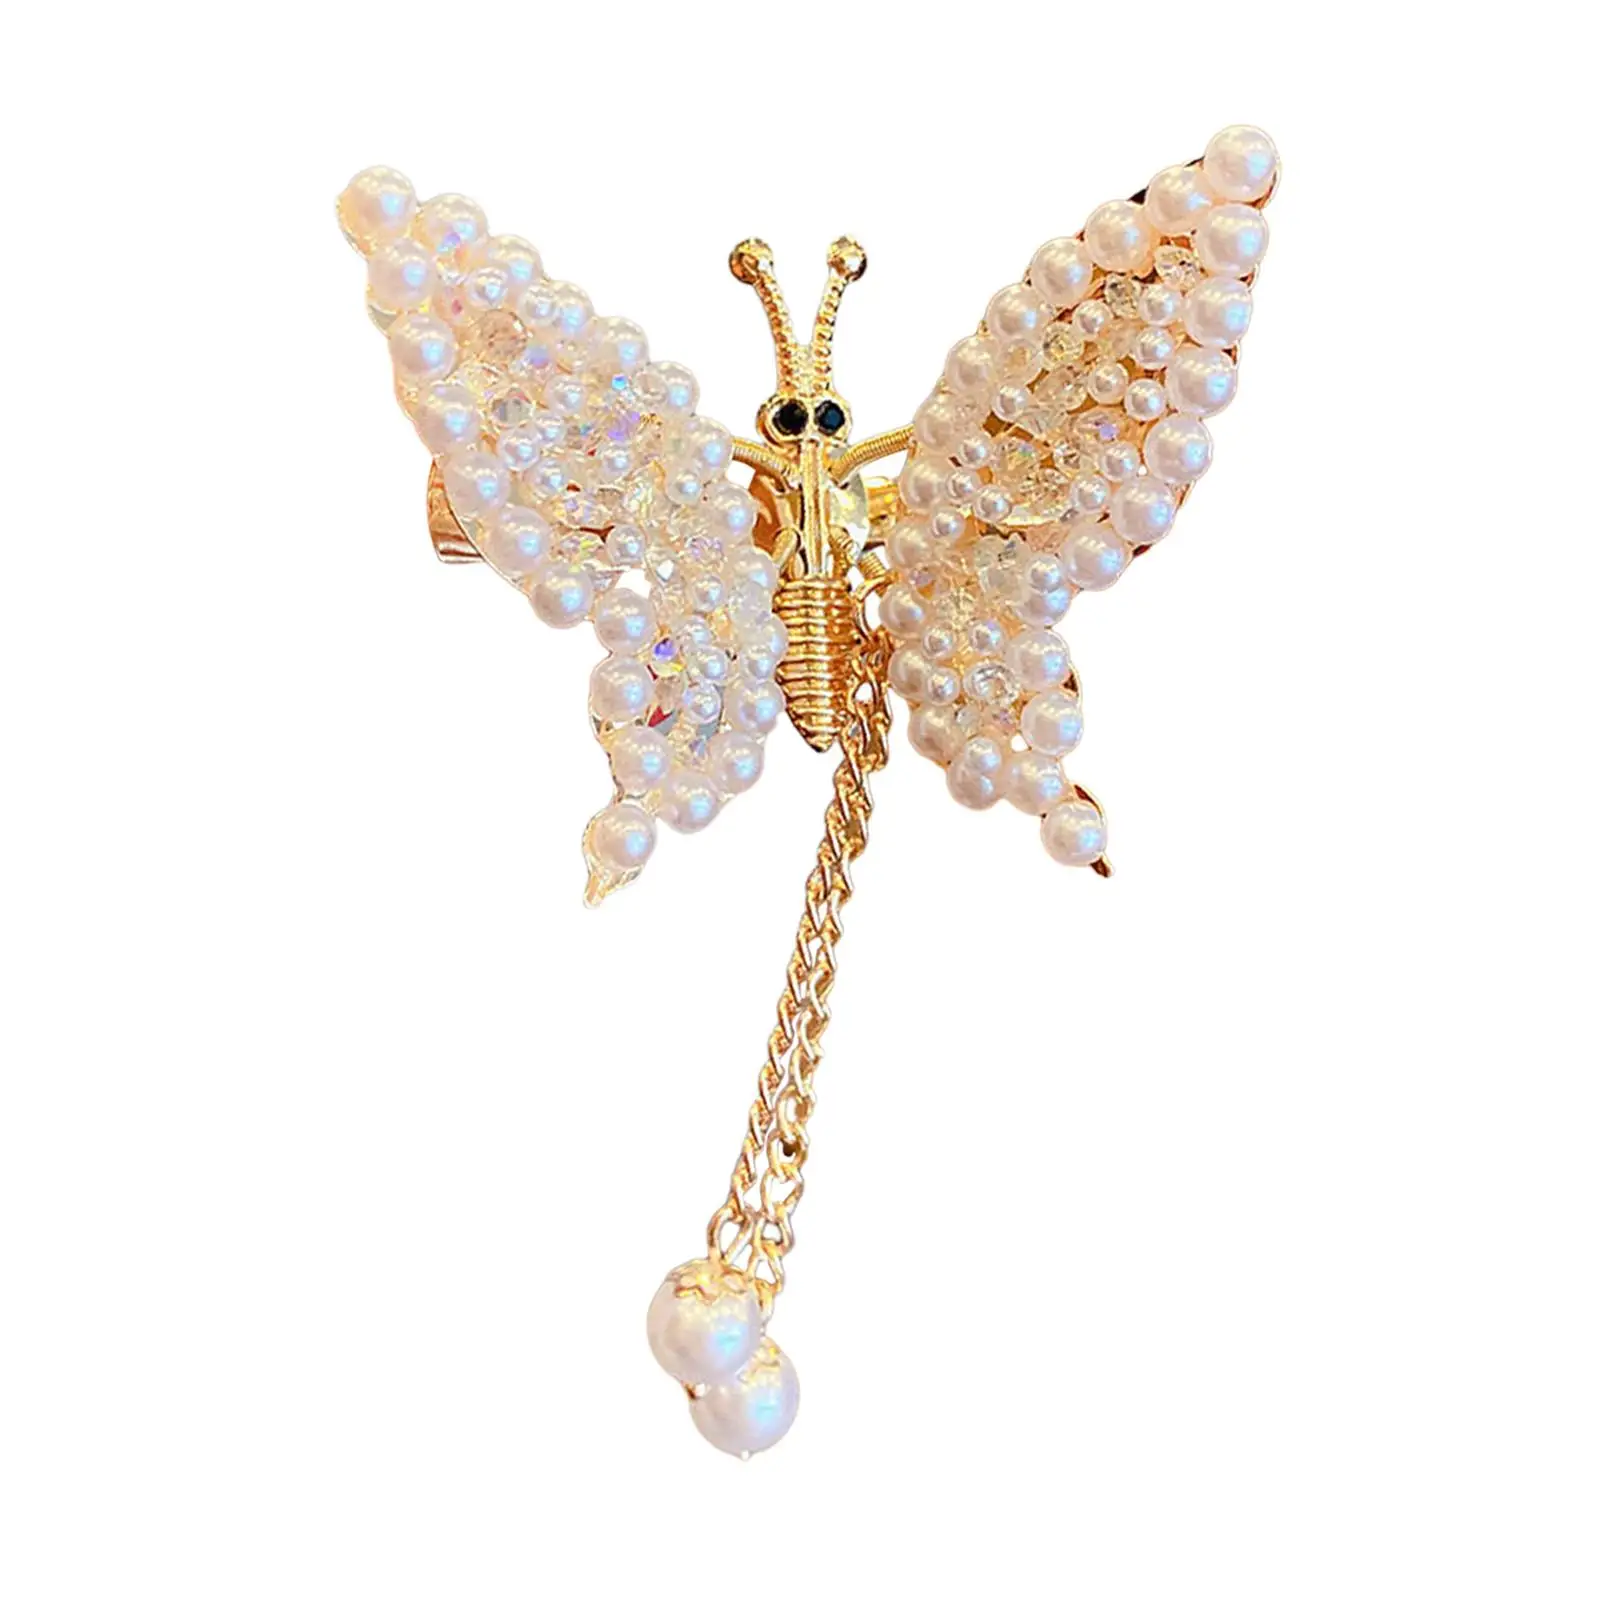 2Pcs Moving Butterfly Hair Clips Metal Moving Wing Bride Wedding Decorative Head Pieces Hair Accessories for Kids Girls Women